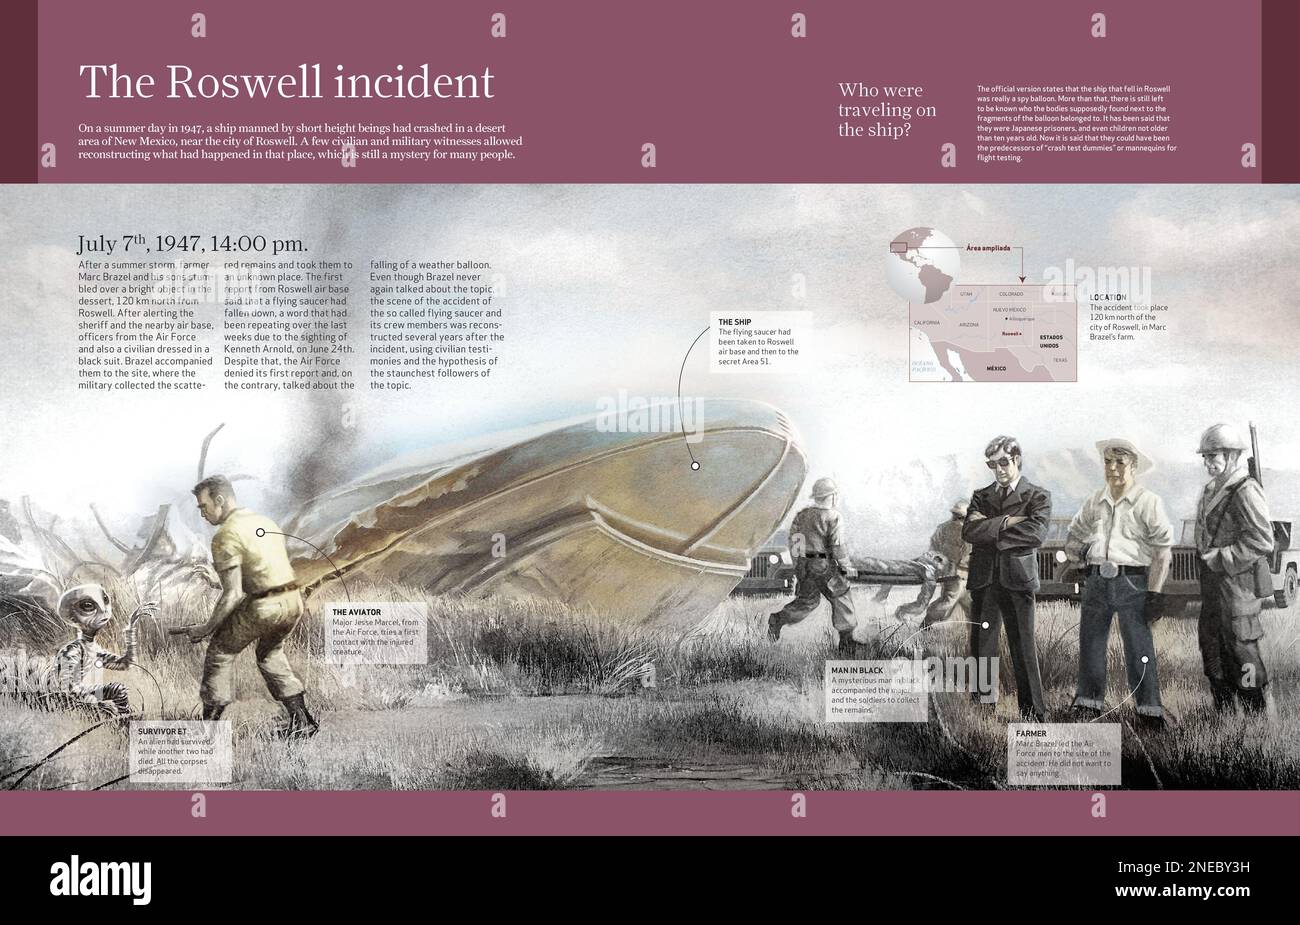 Infographic that dramatizes the Roswell incident, when a manned ship crashed on a private property of New Mexico. [Adobe InDesign (.indd); 4960x3188]. Stock Photo